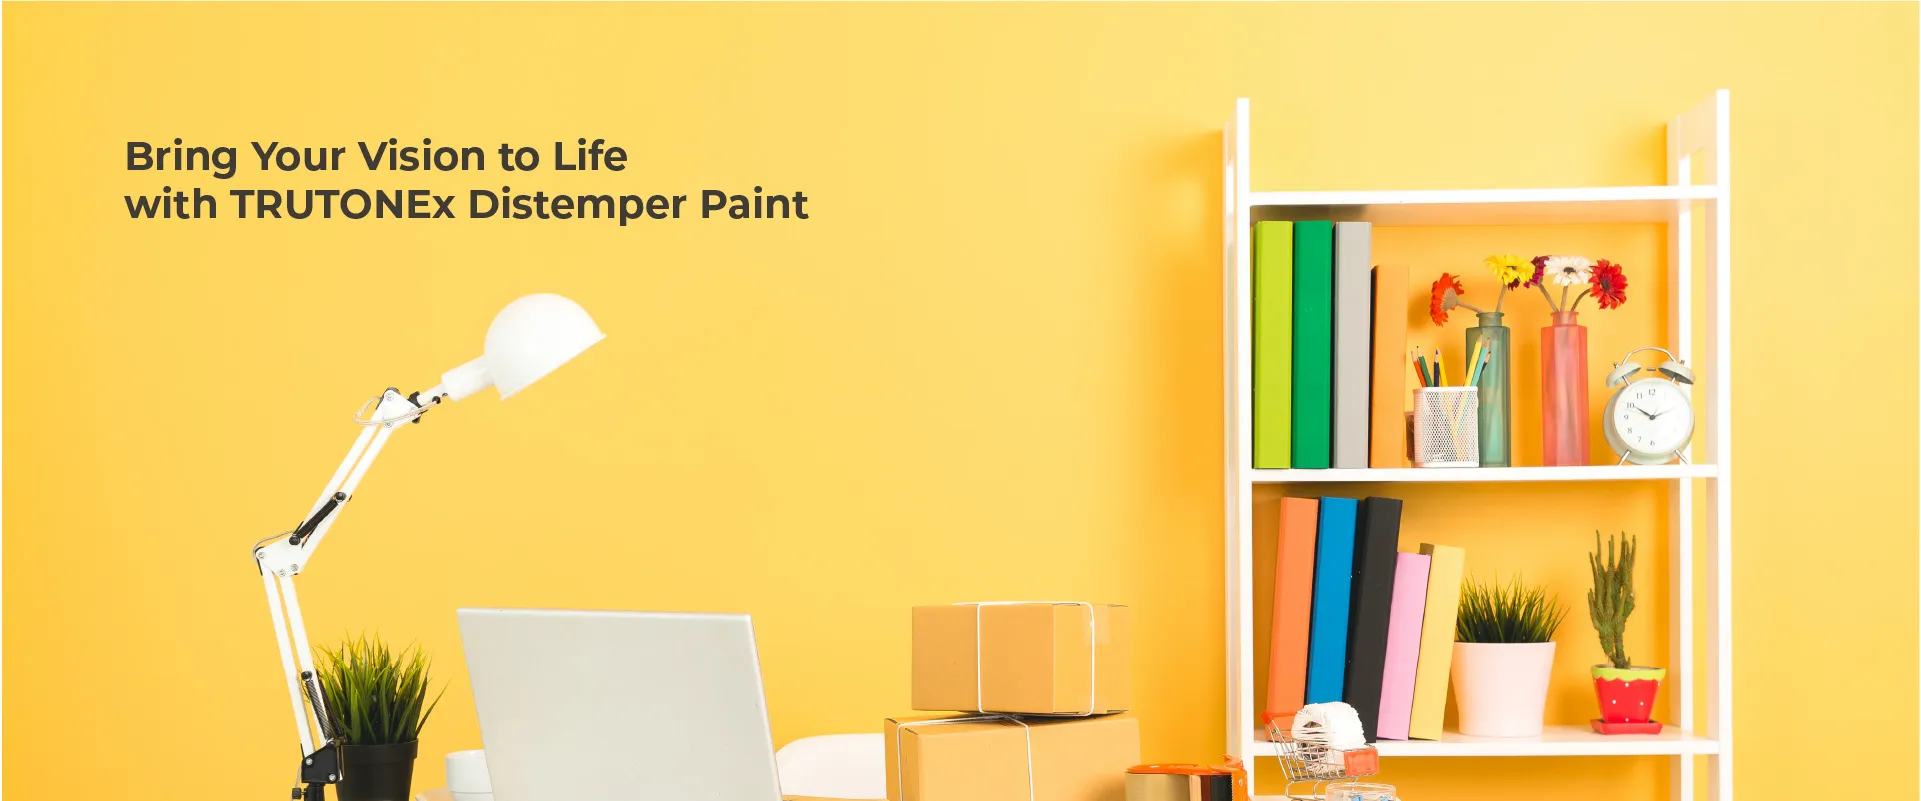 Bring Your Vision to Life with TRUTONEx Distemper Paint